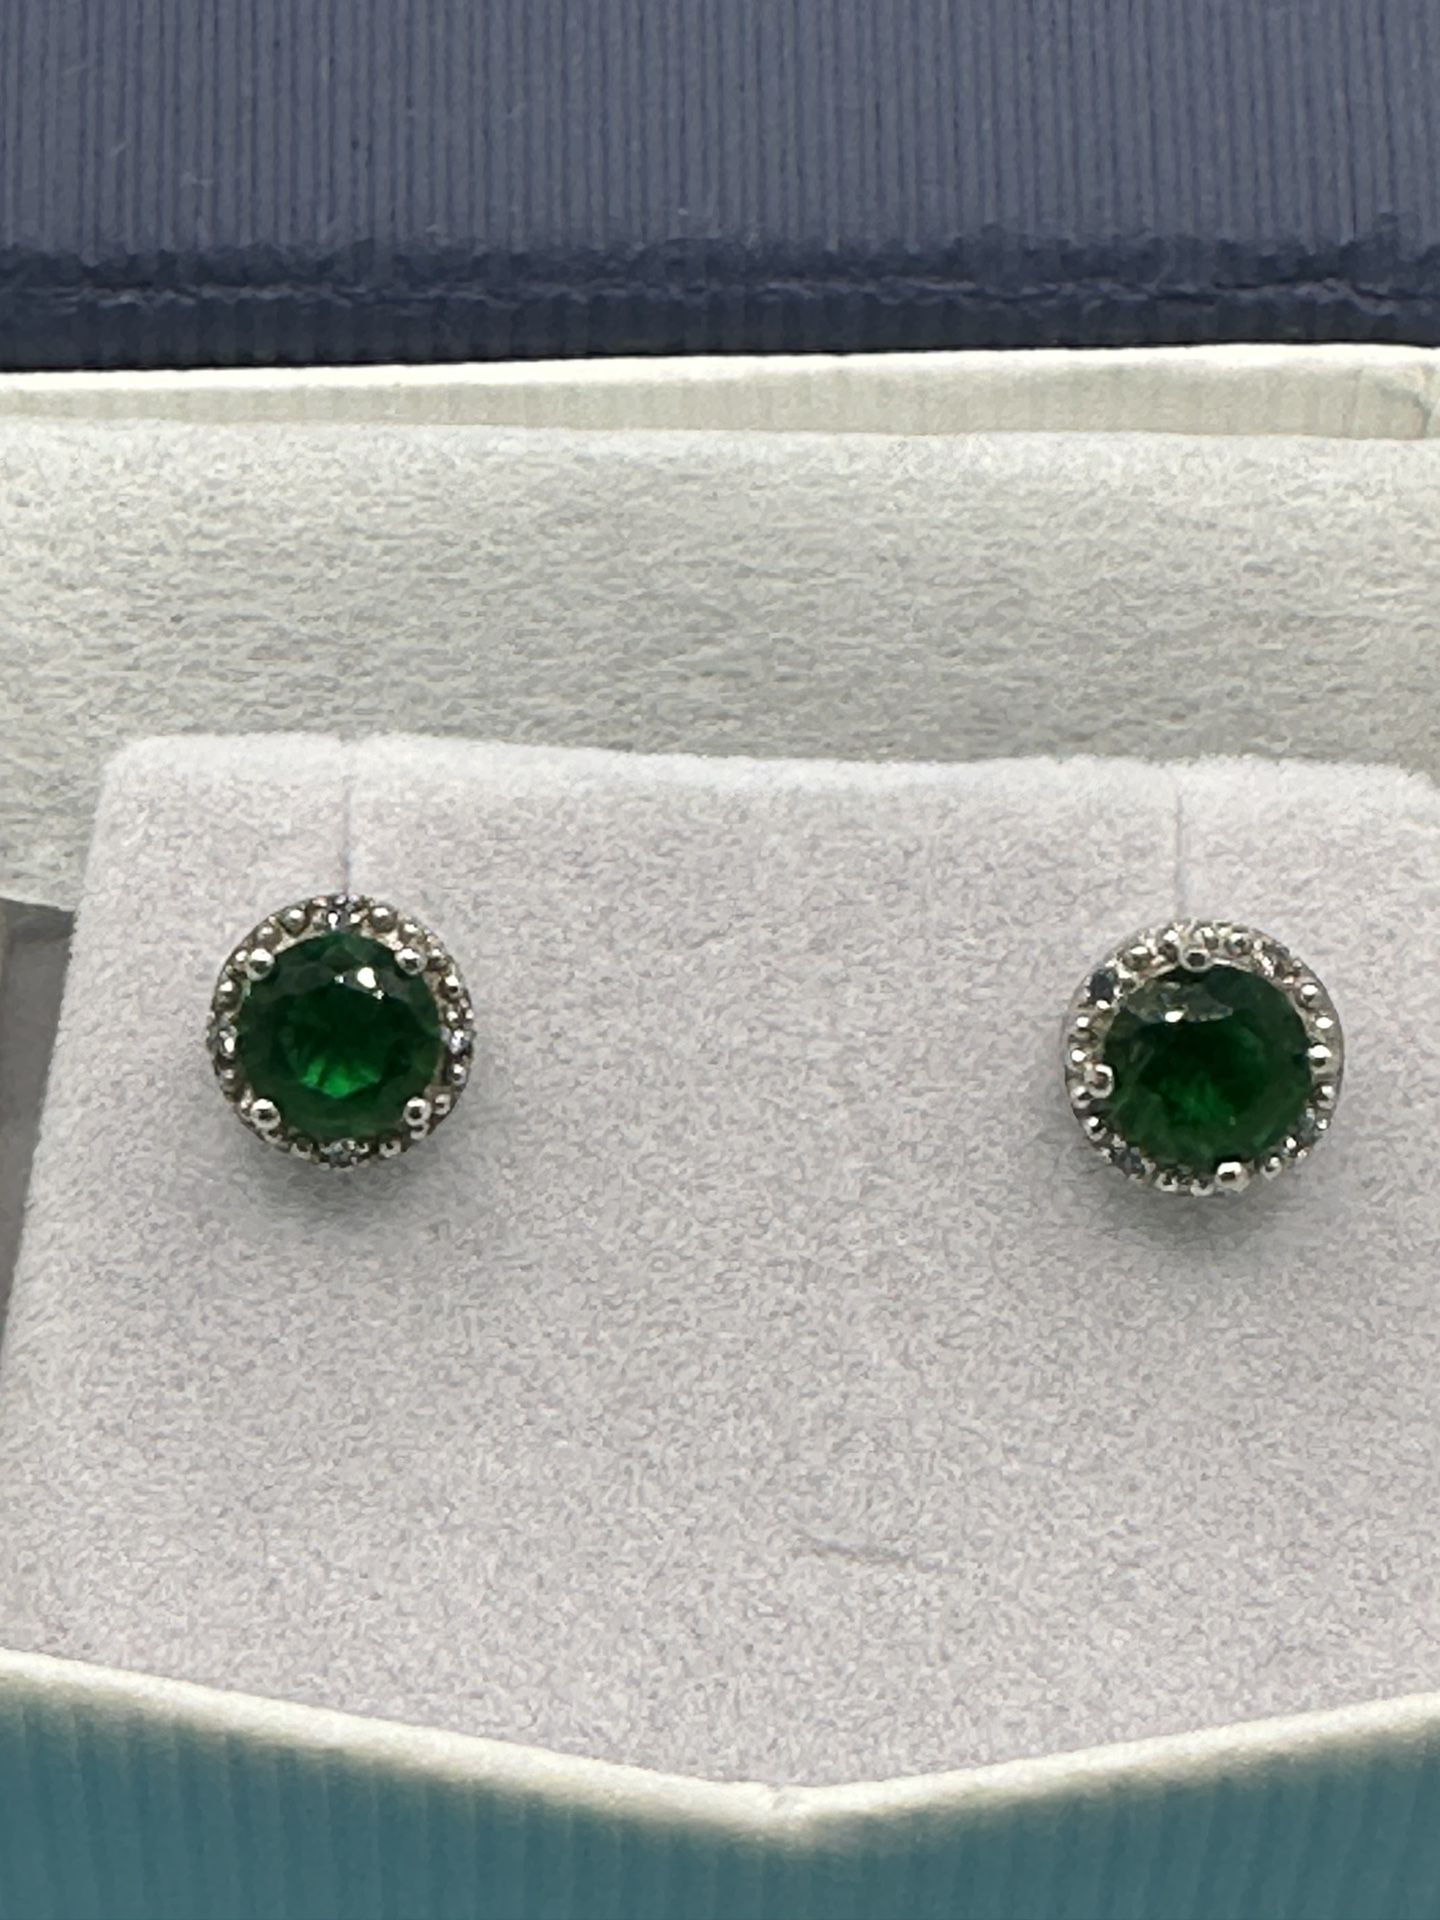 New Emerald Round 2.00 Carat Stud Earrings Sterling Silver 1.50 Grams Total